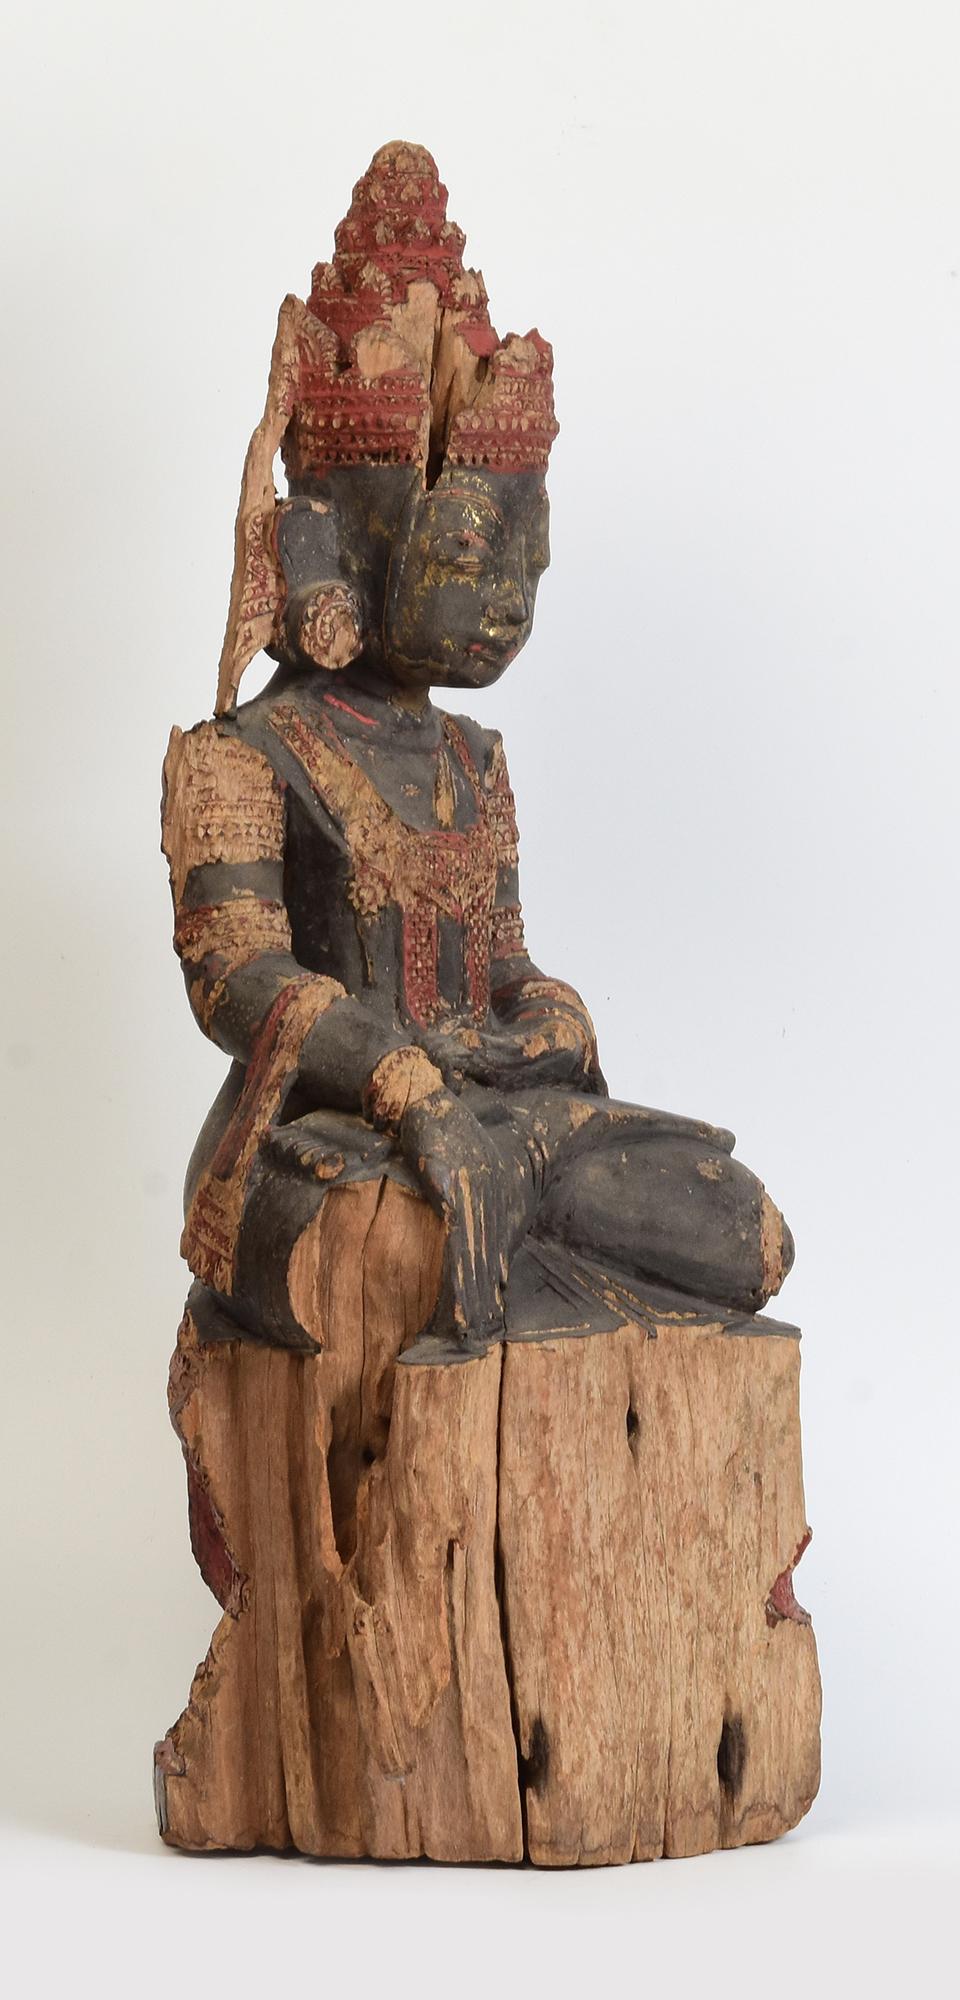 16th Century, Ava, Rare Antique Burmese Wooden Seated Crowned Buddha For Sale 9